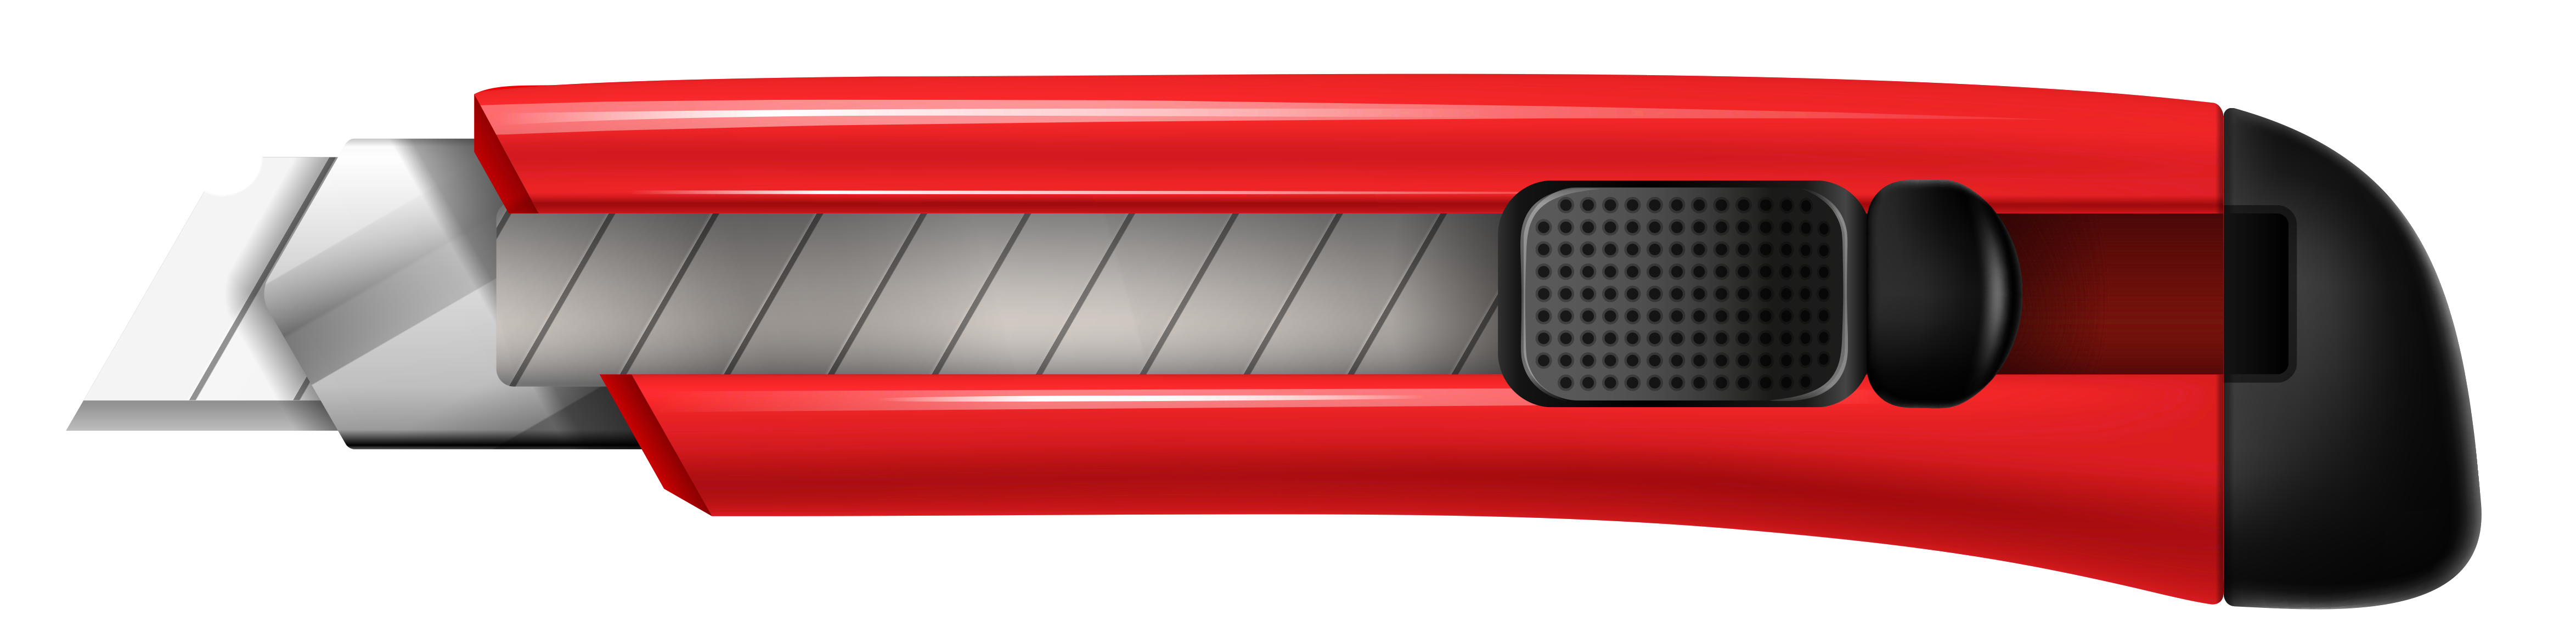 chip-ragsdale-box-cutter-in-red